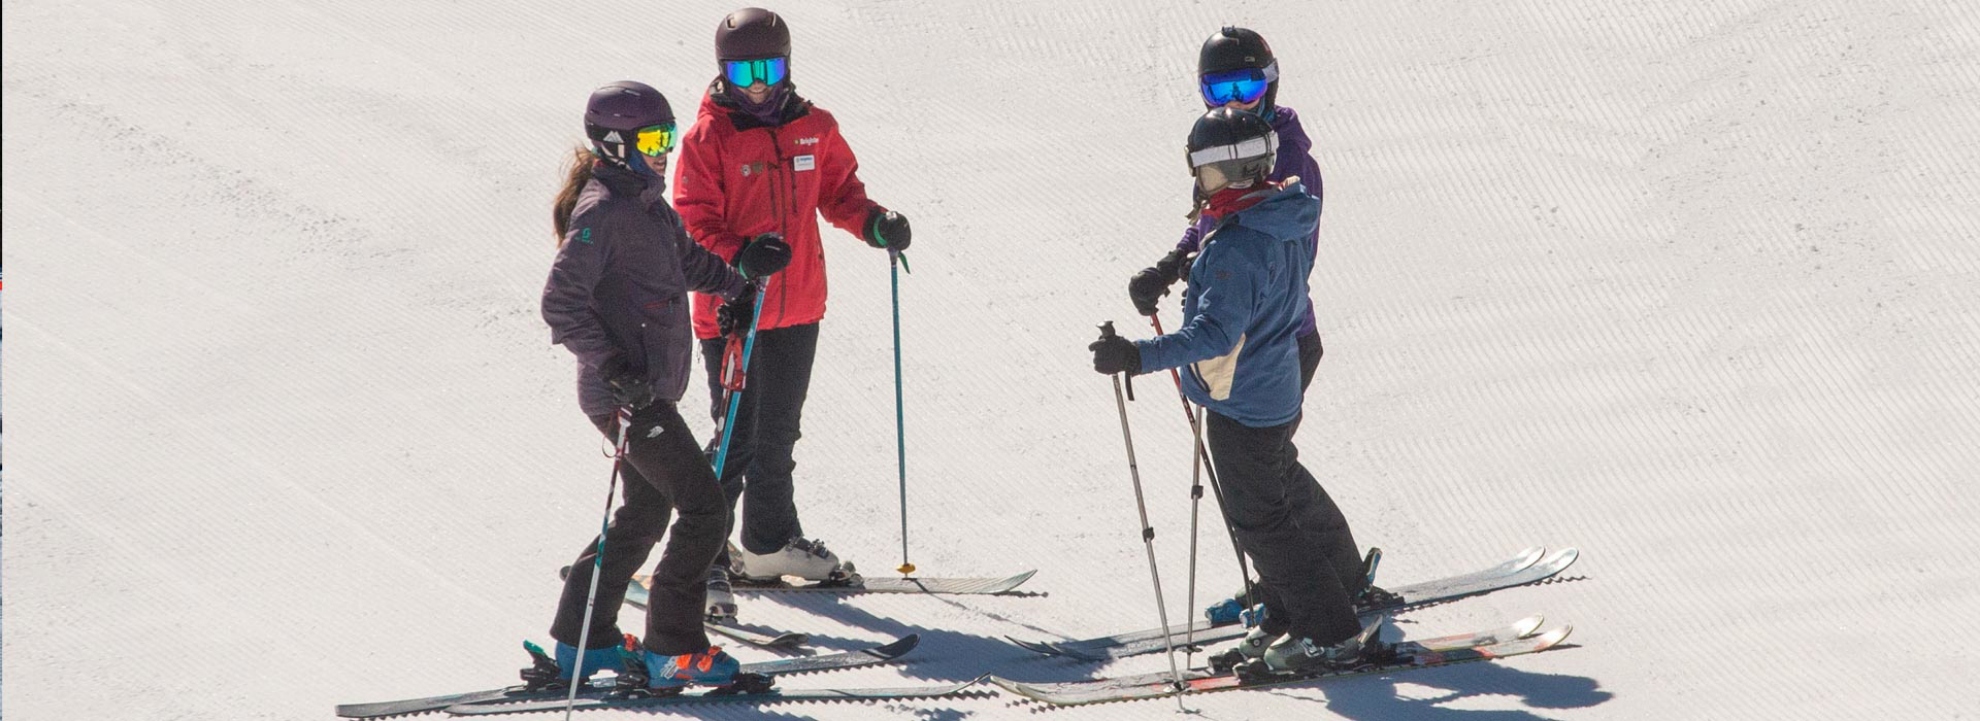 Women learning to ski together with a Brighton Snowsports School instructor	